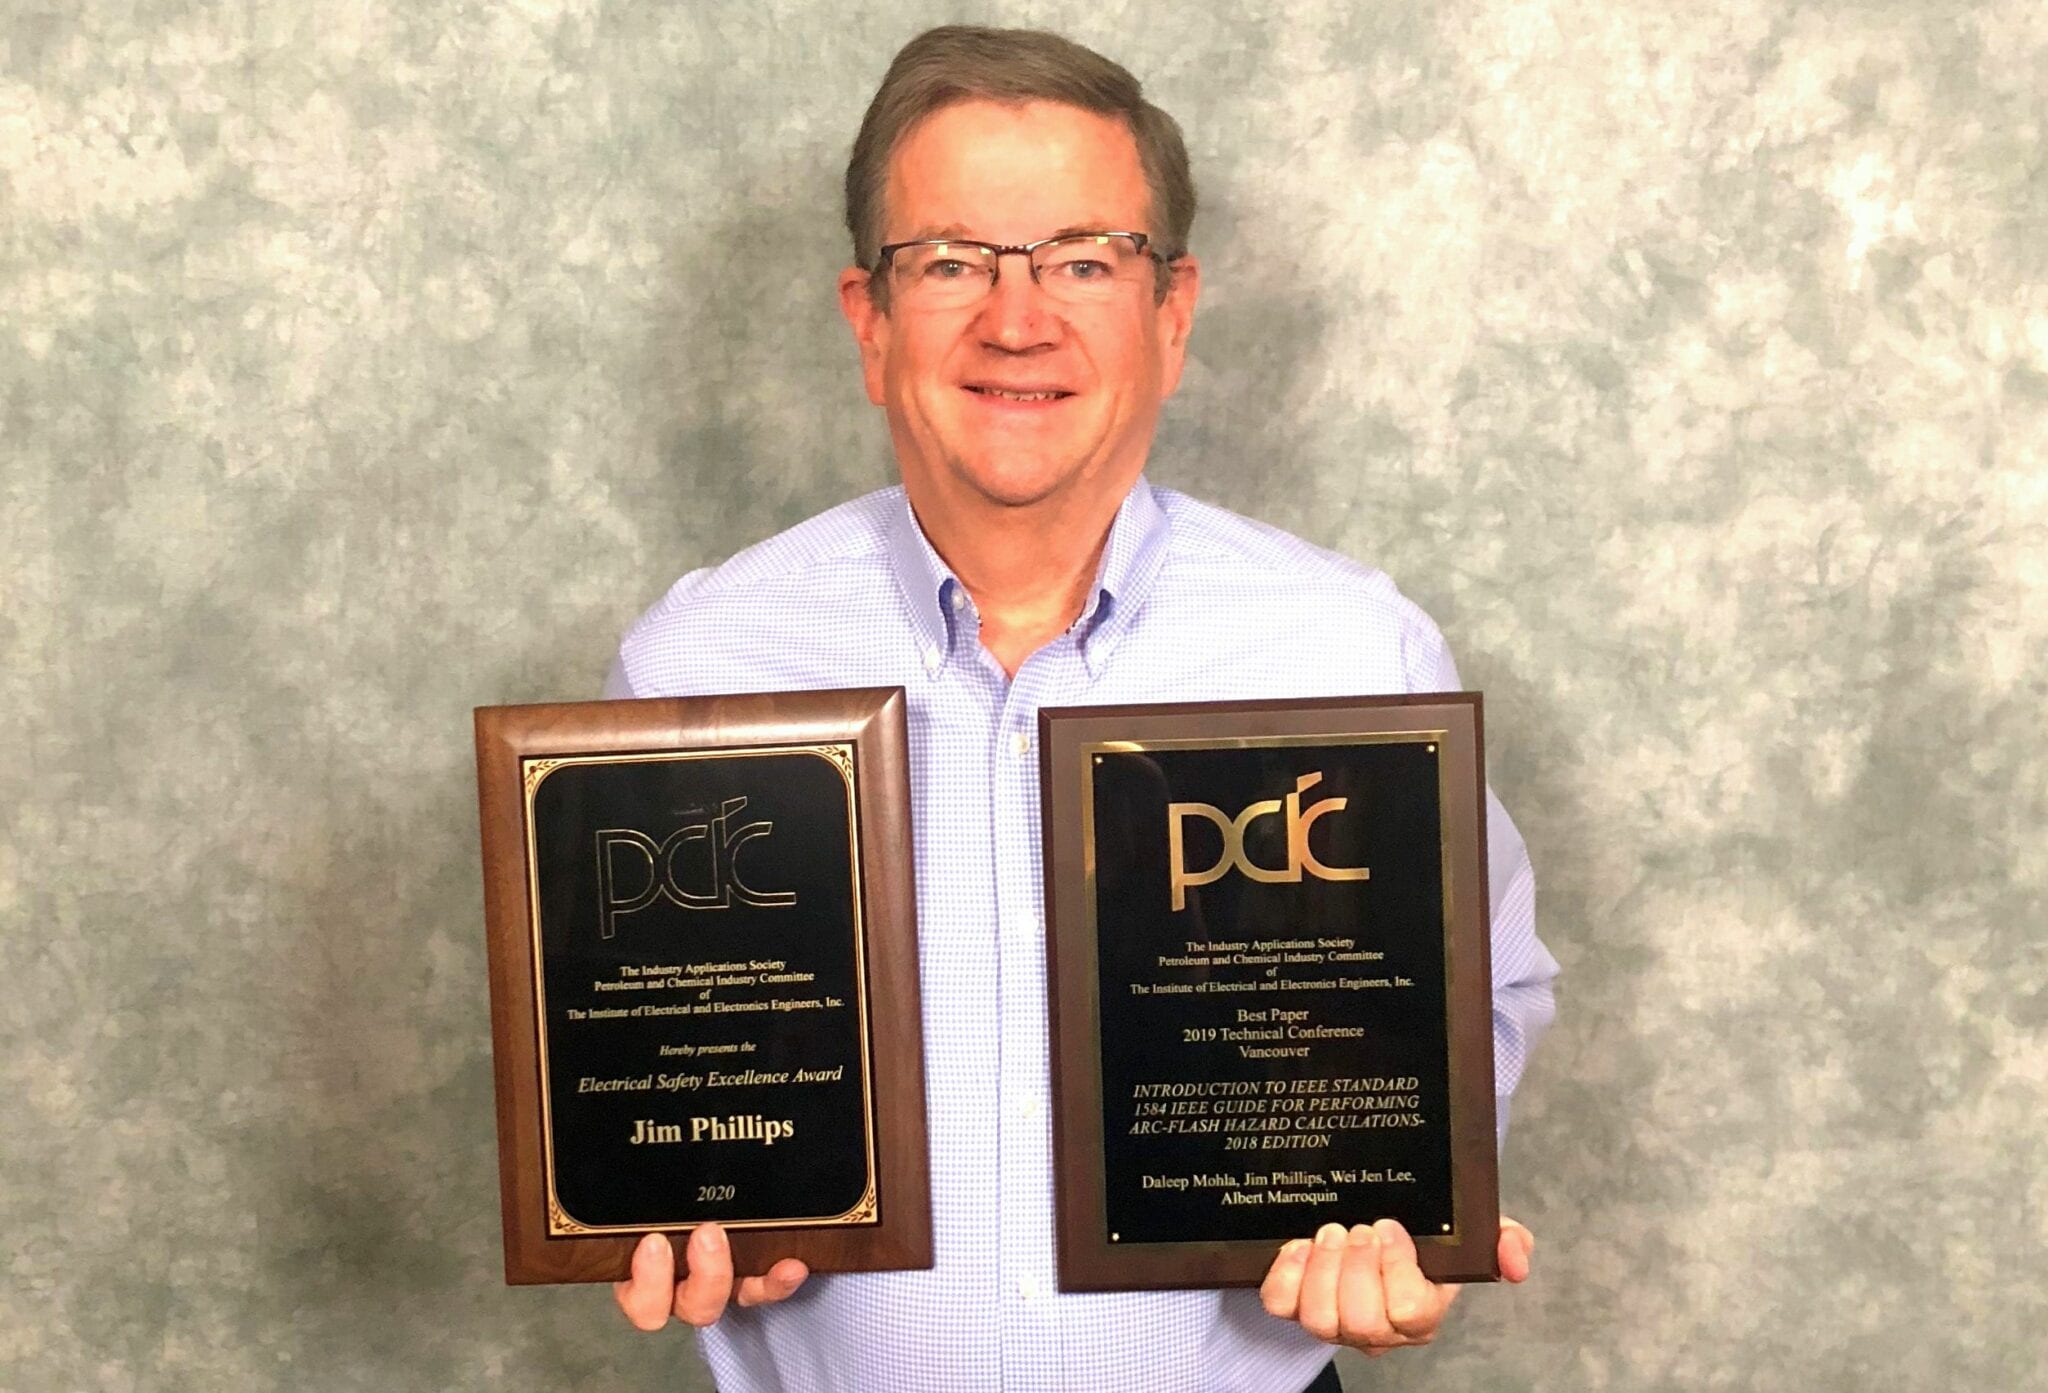 Jim Phillips, P.E. Receives Two Prestigious Awards From IEEE PCIC